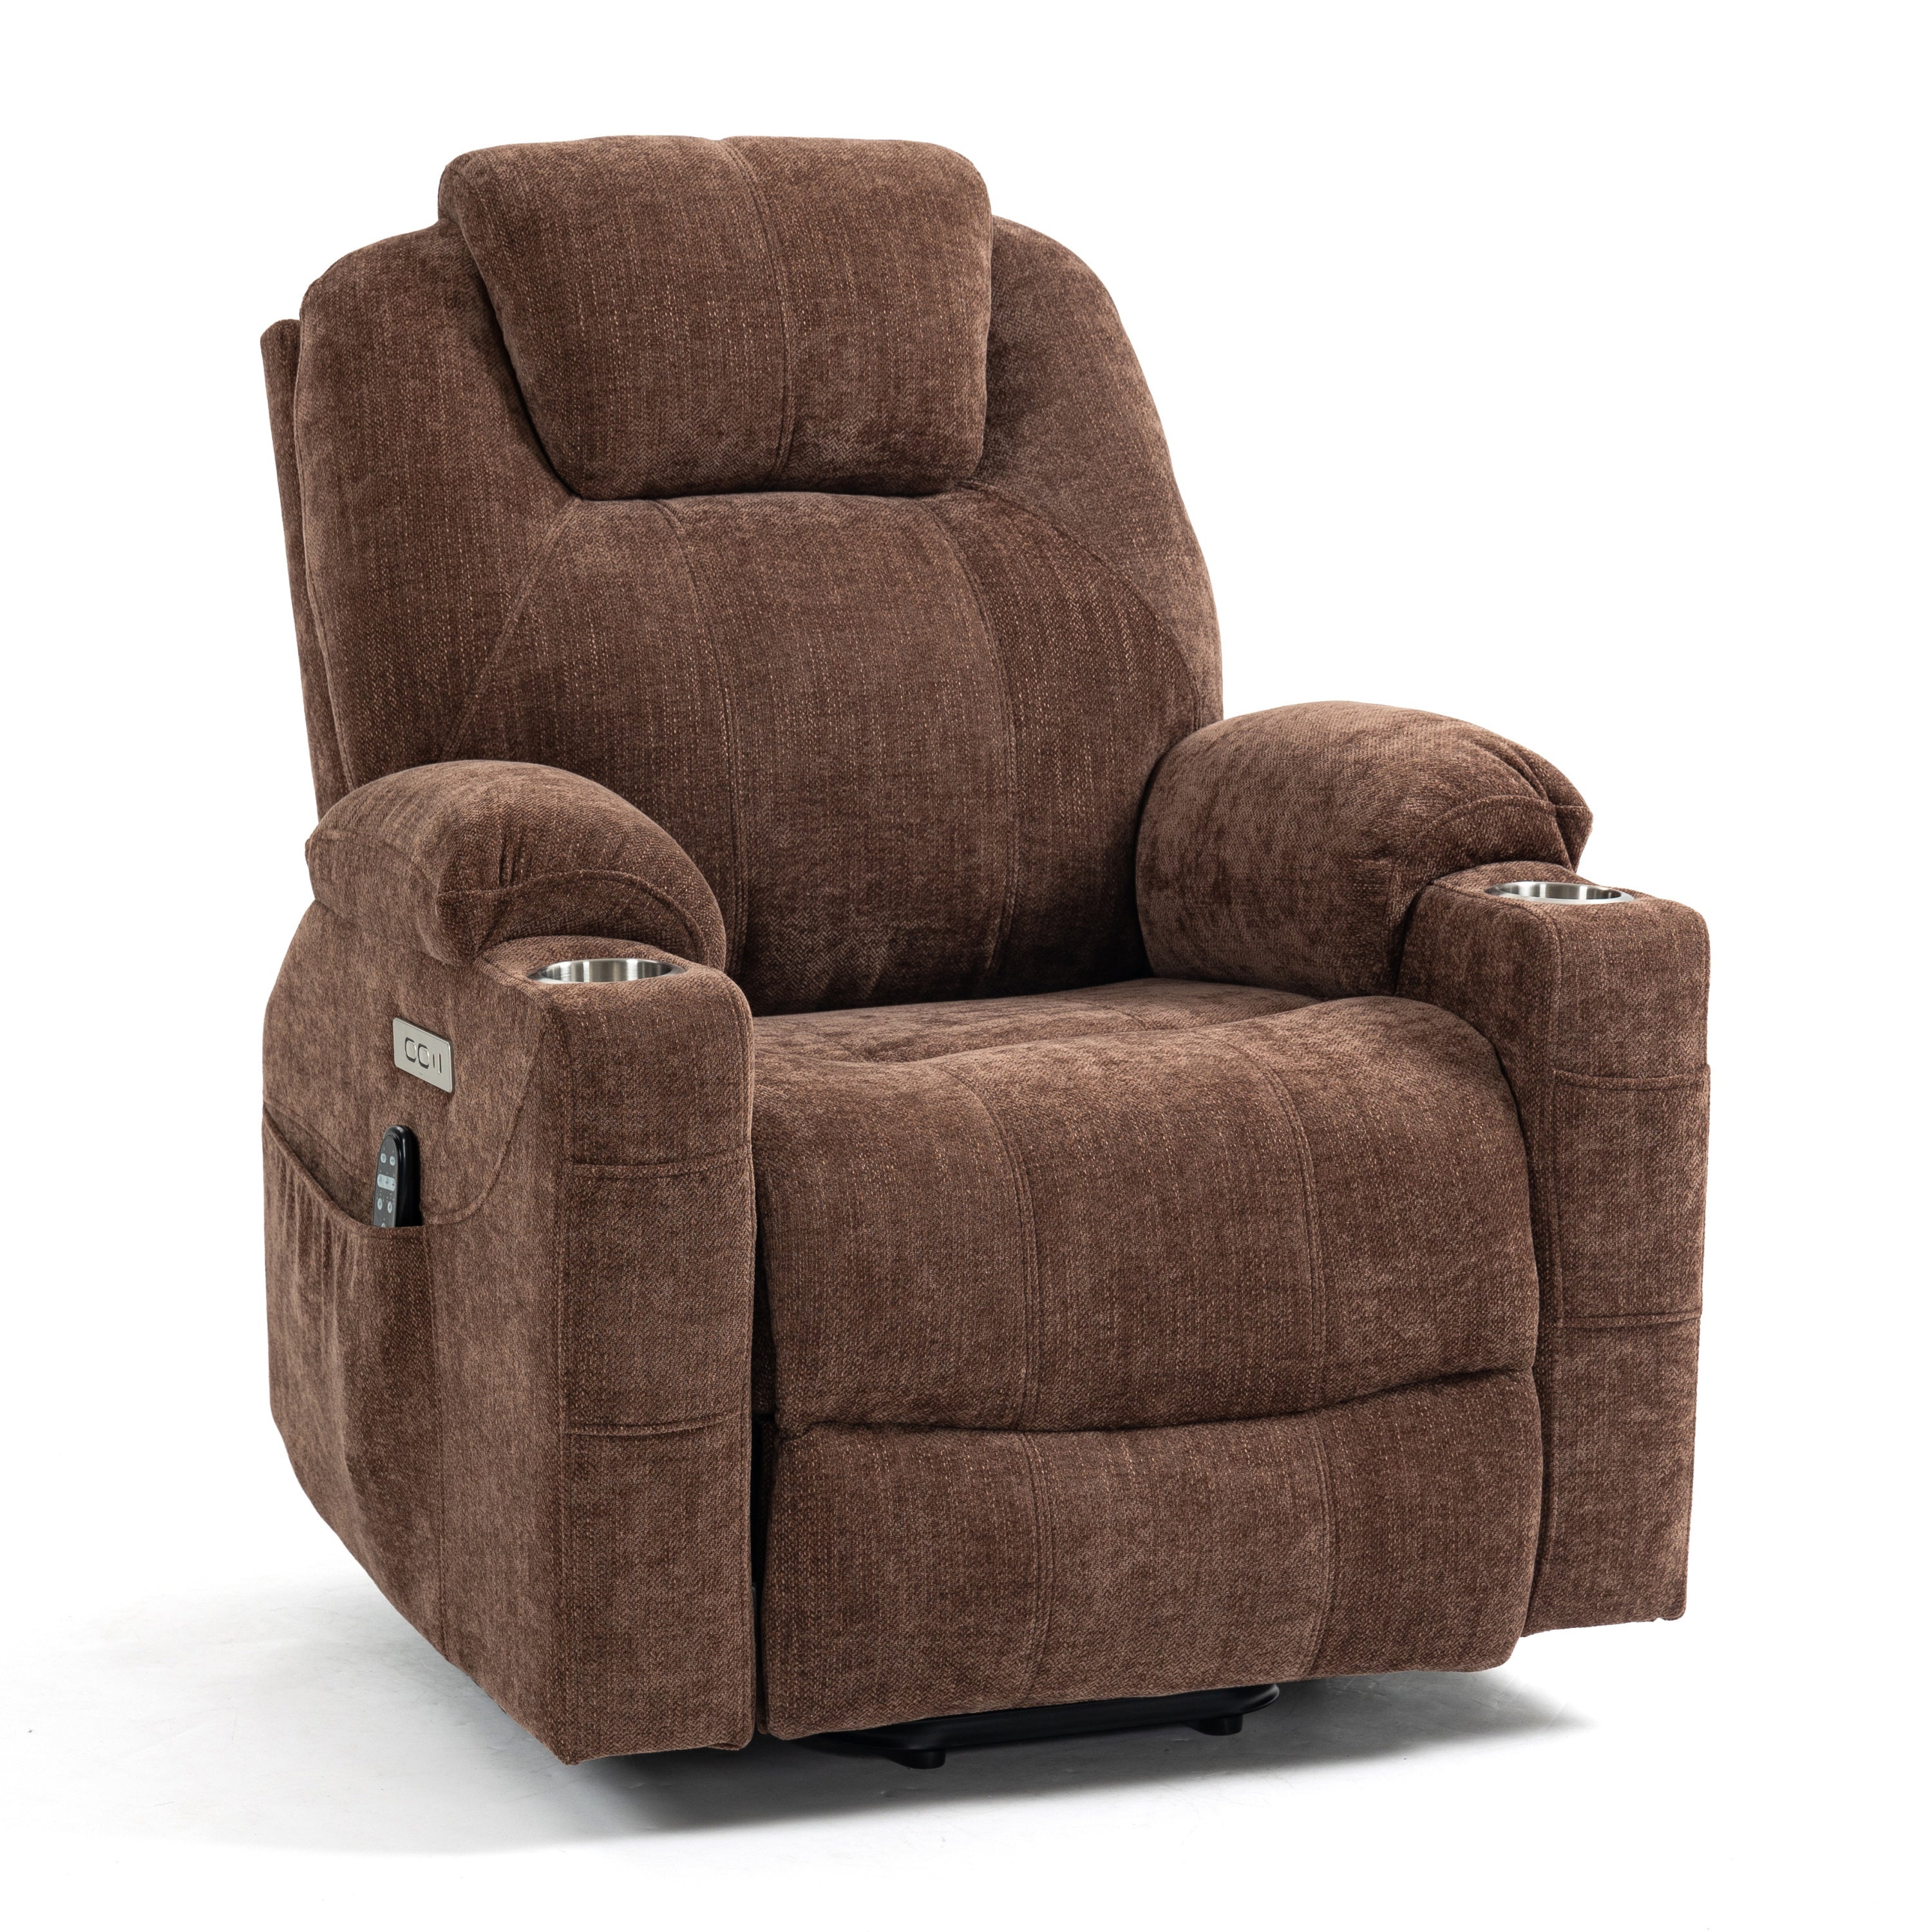 Brown Chenille Power Lift Recliner Chair, angle view seated